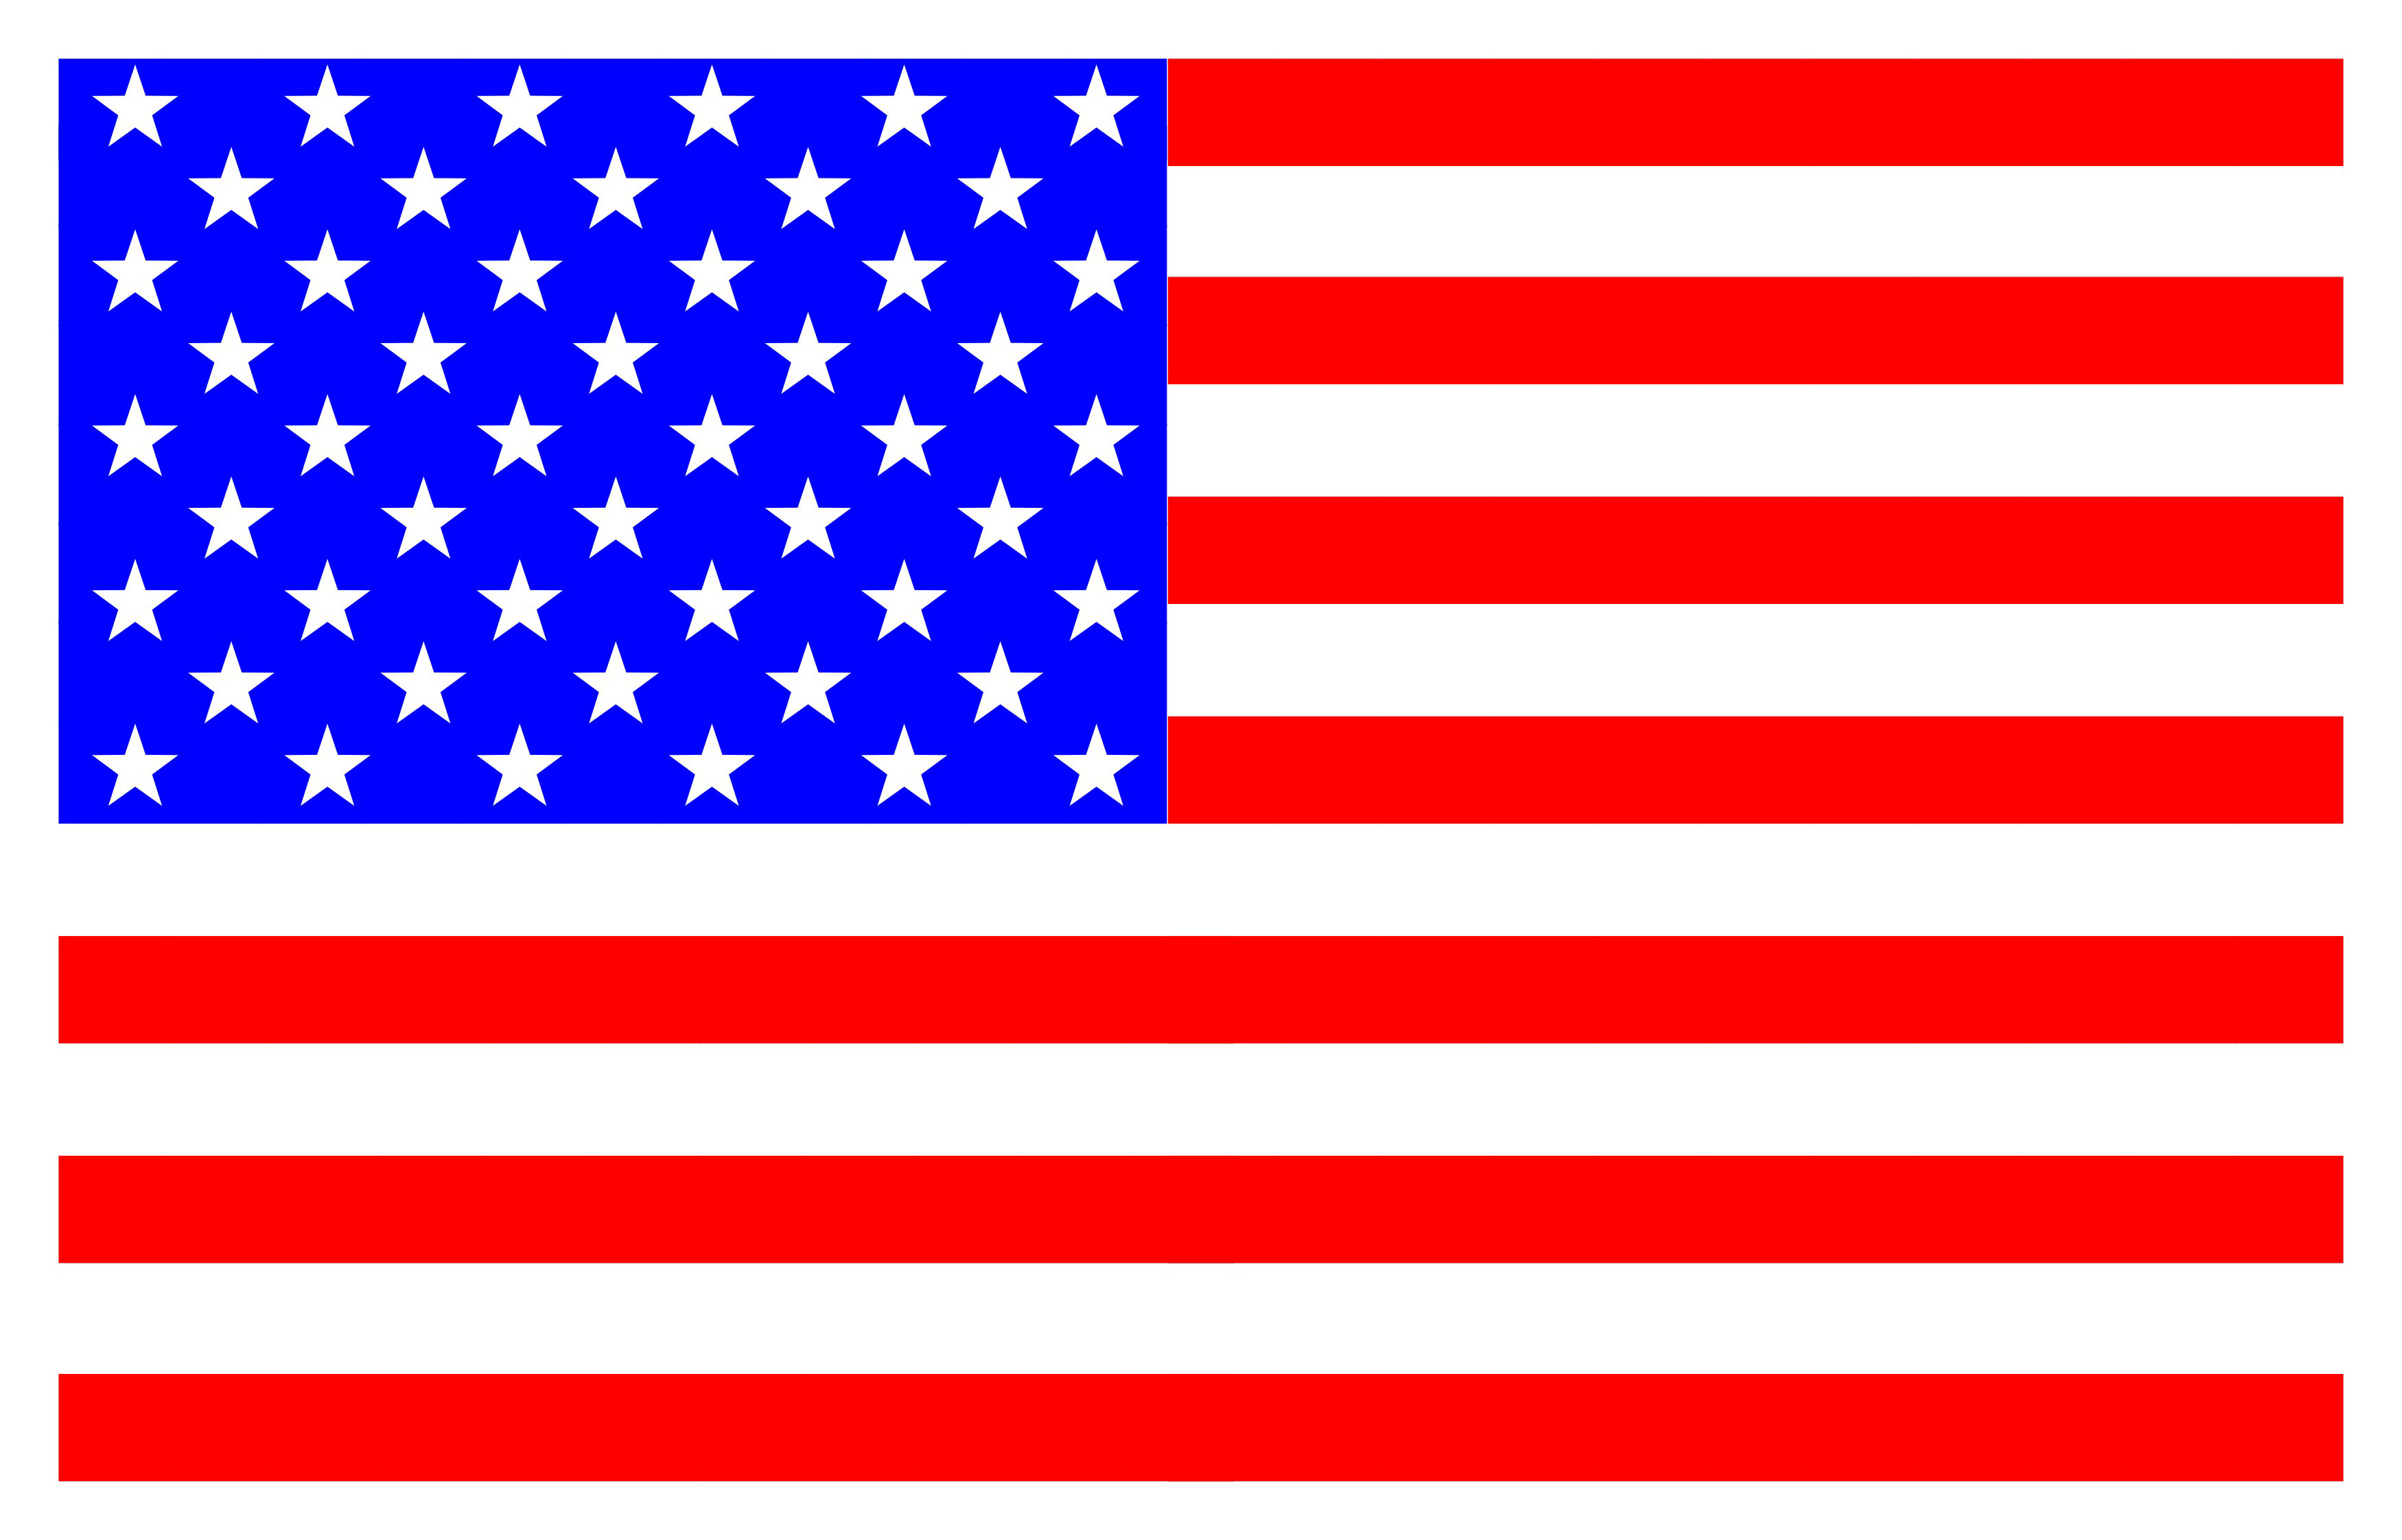 Decoding The American Flag